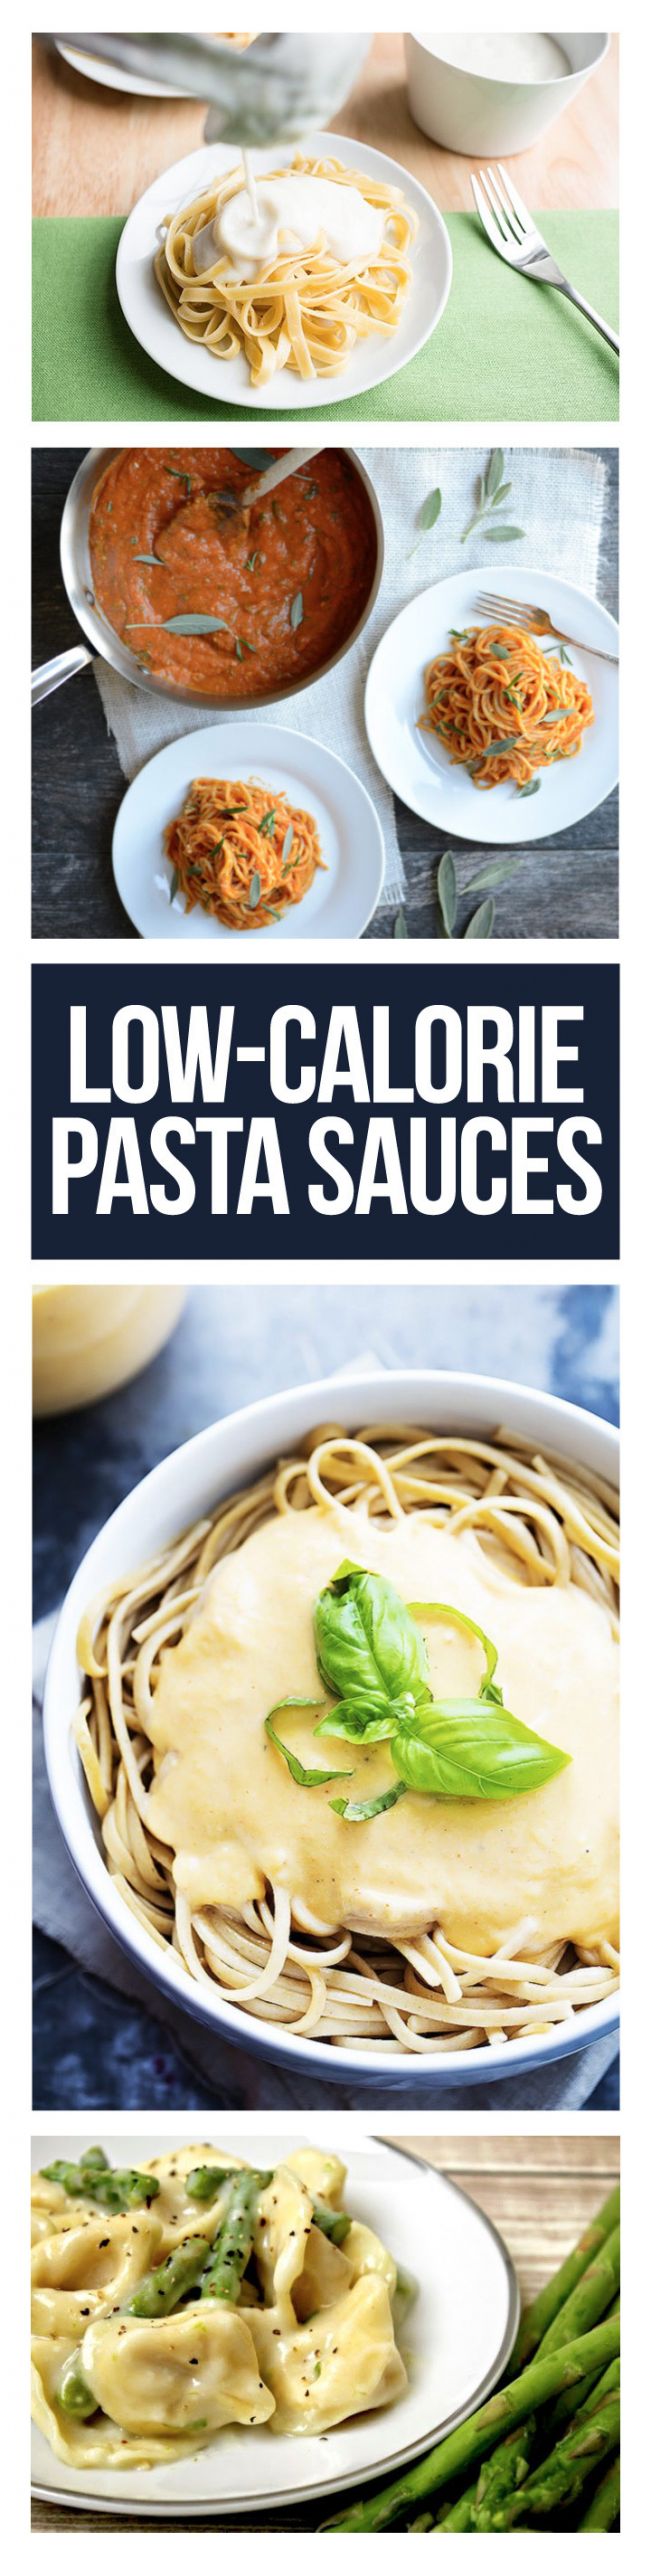 Low Calorie Pasta Sauce Recipes
 These Pasta Sauces ly TASTE Like A Cheat Meal